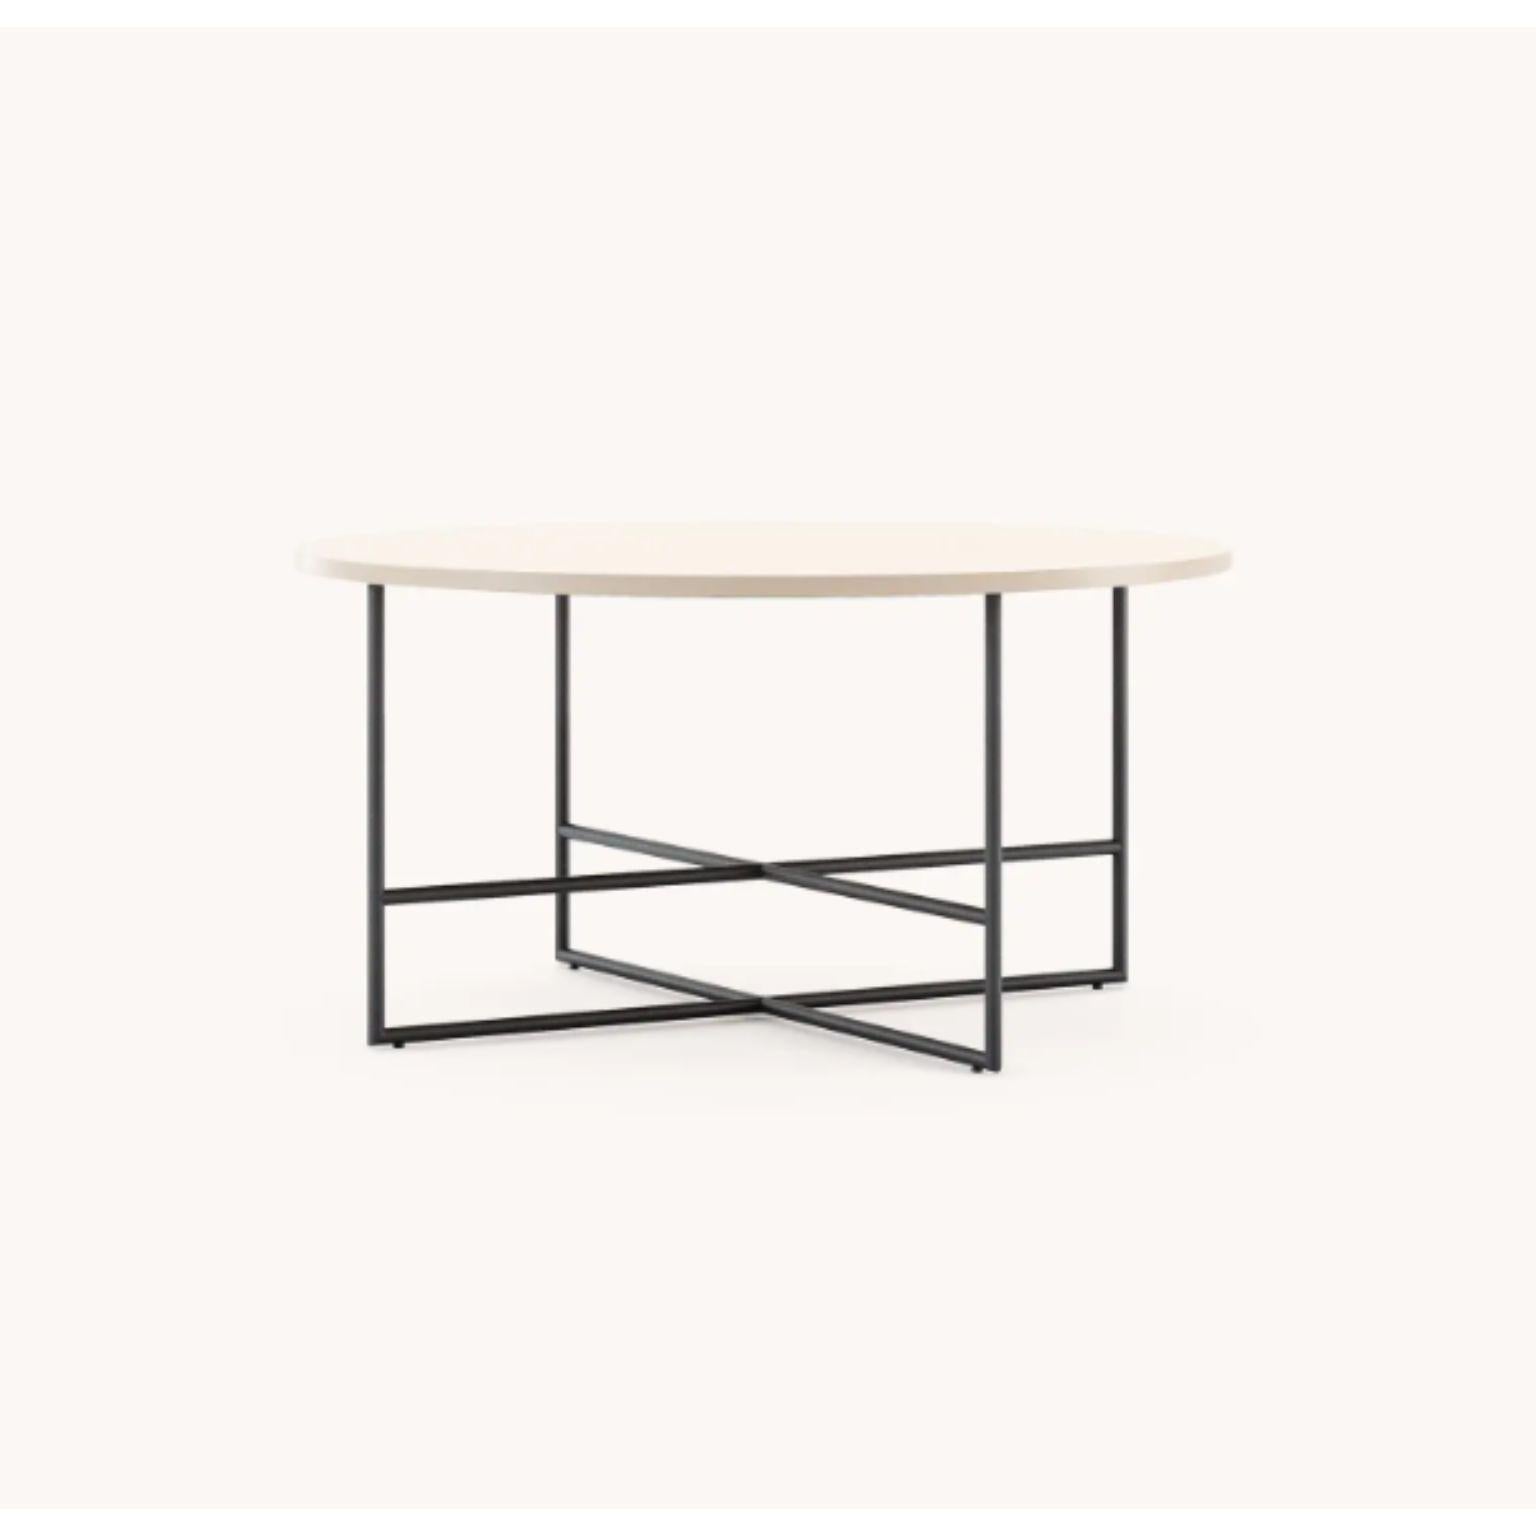 Small inside side table by Domkapa
Dimensions: W 70 x D 70 x H 34.5 cm.
Materials: Black texturized steel, moka lacquered matte.
Also available in different materials.

Inside table set includes different versions to fulfill all of your